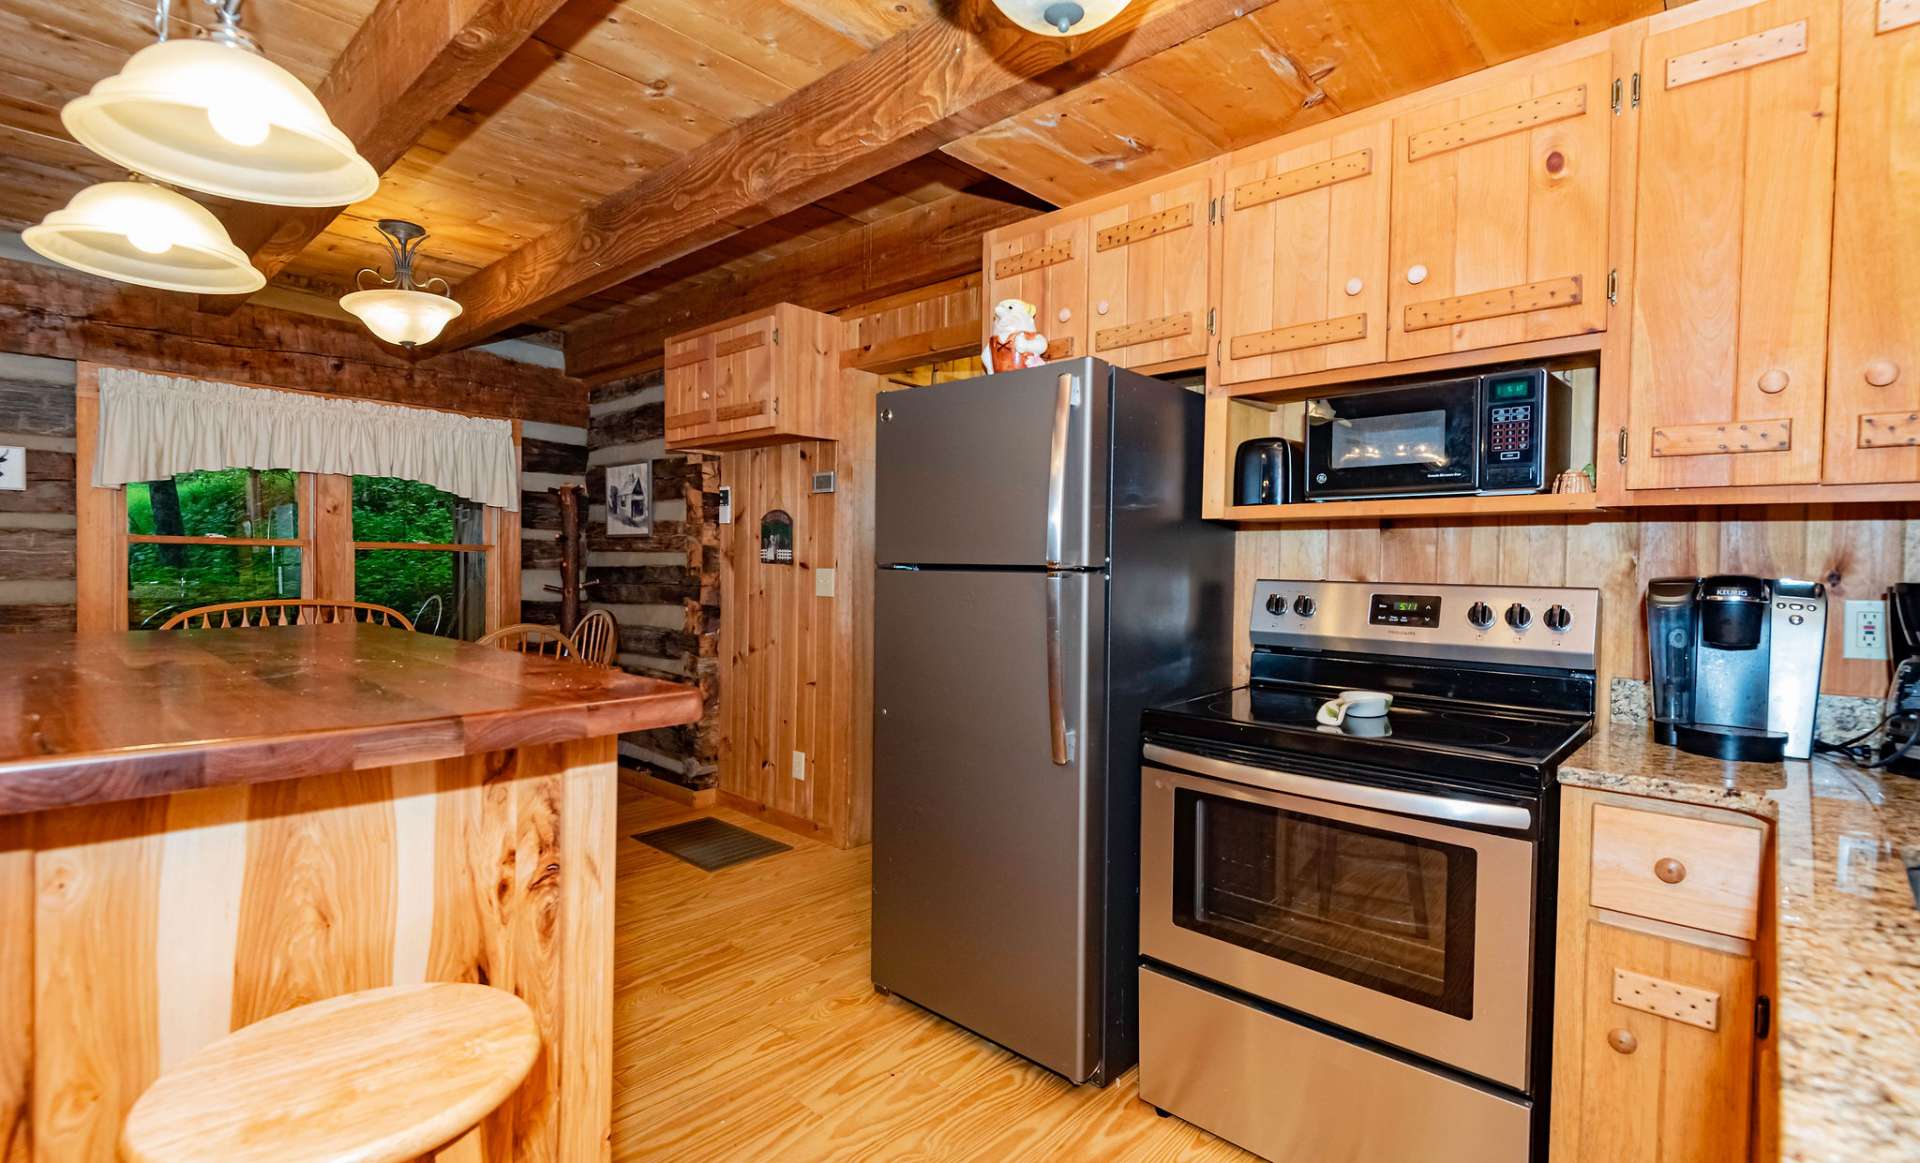 The efficient kitchen area offers stainless appliances, granite counters, and center work island with additional seating.